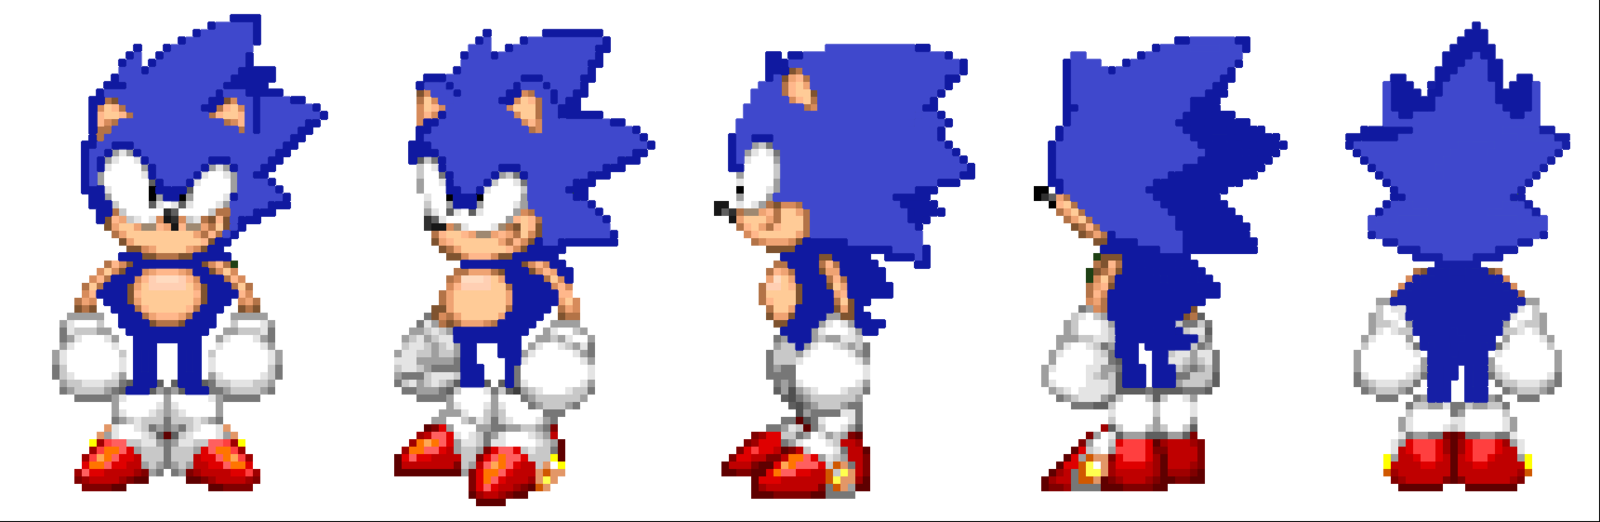 sonic82.3png.png